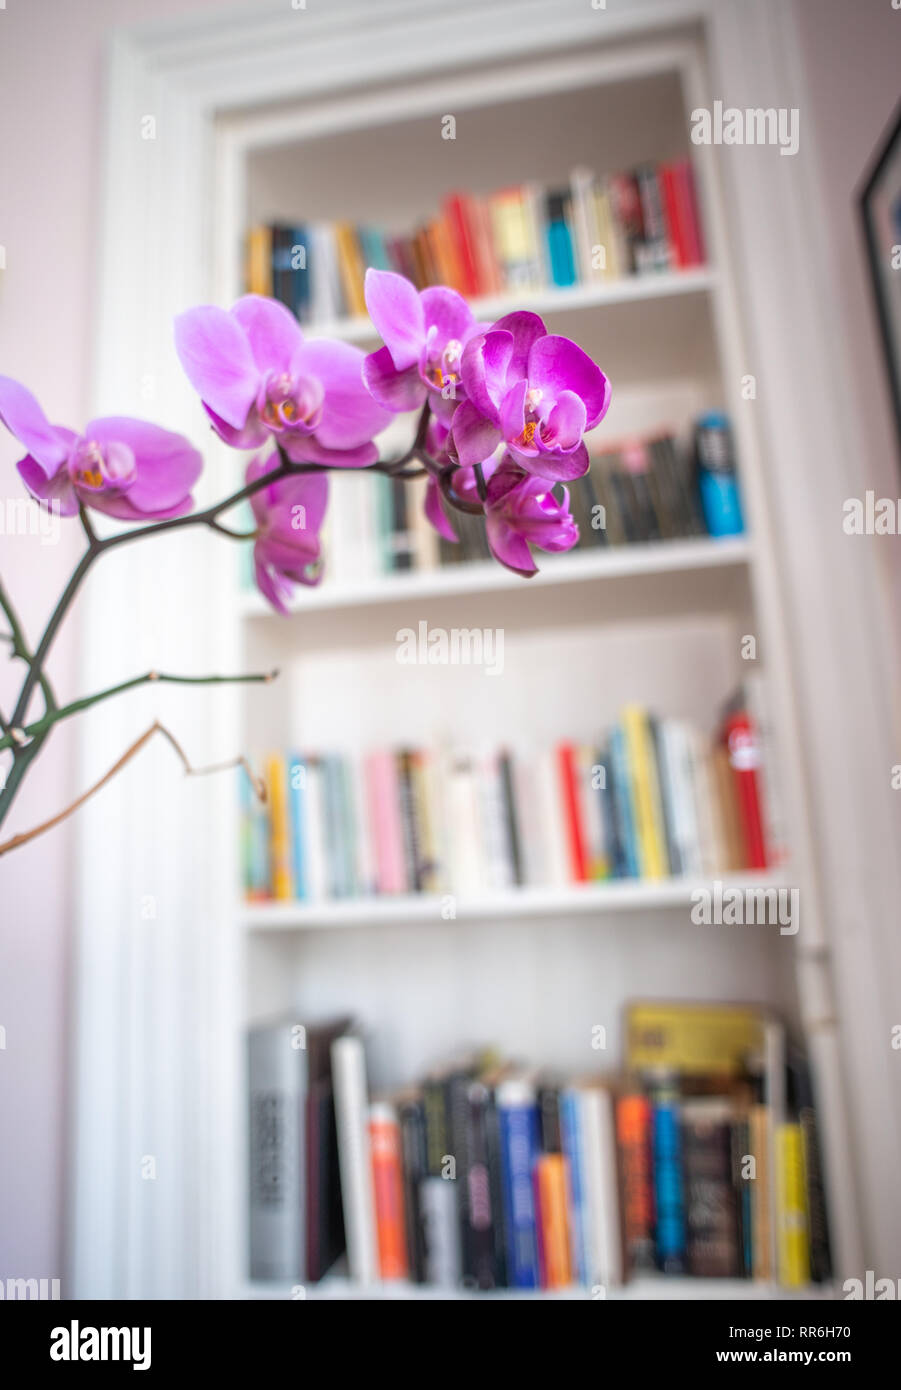 Detail Of A Beautiful Purple Orchid Flower Against A Retro Vintage Bookcase In A Victorian Apartment Or Flat Stock Photo